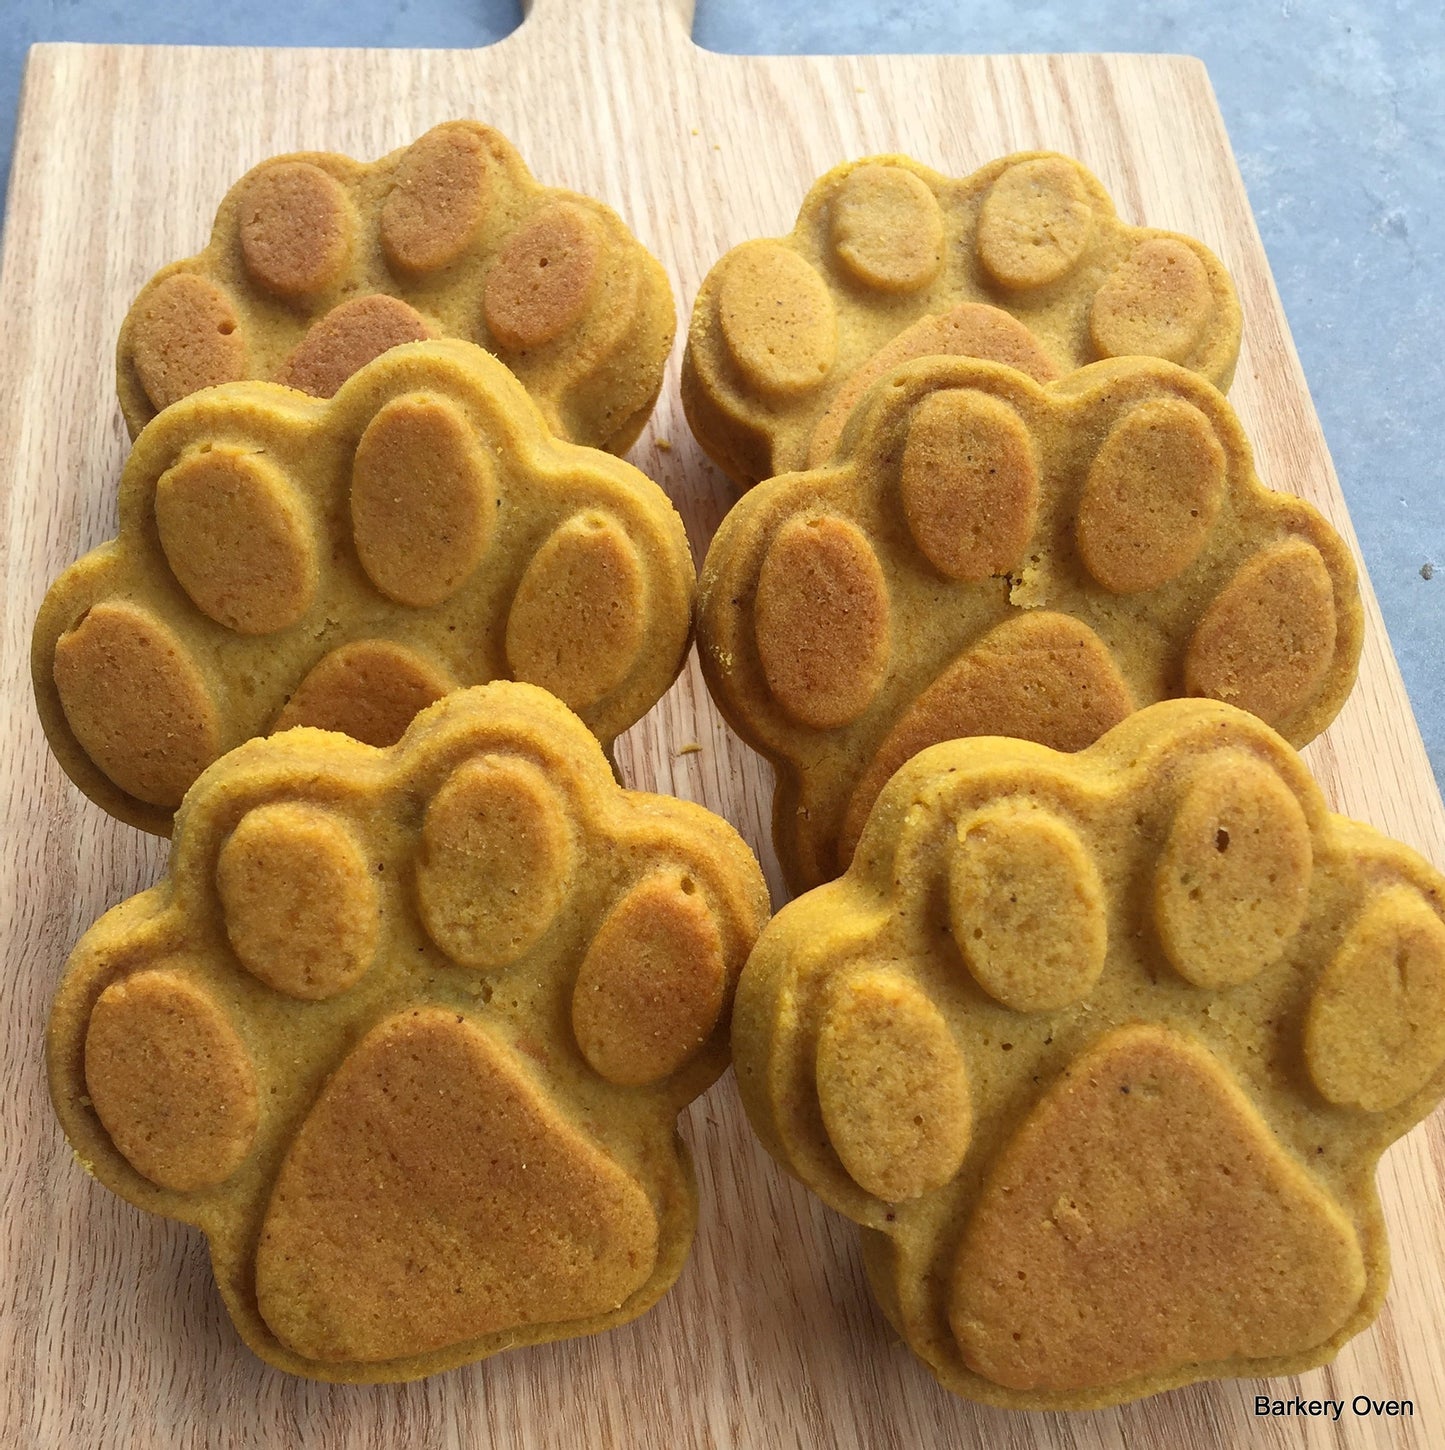 Barkery Oven Wheat Free Pumpkin Pawffin, 6 pieces